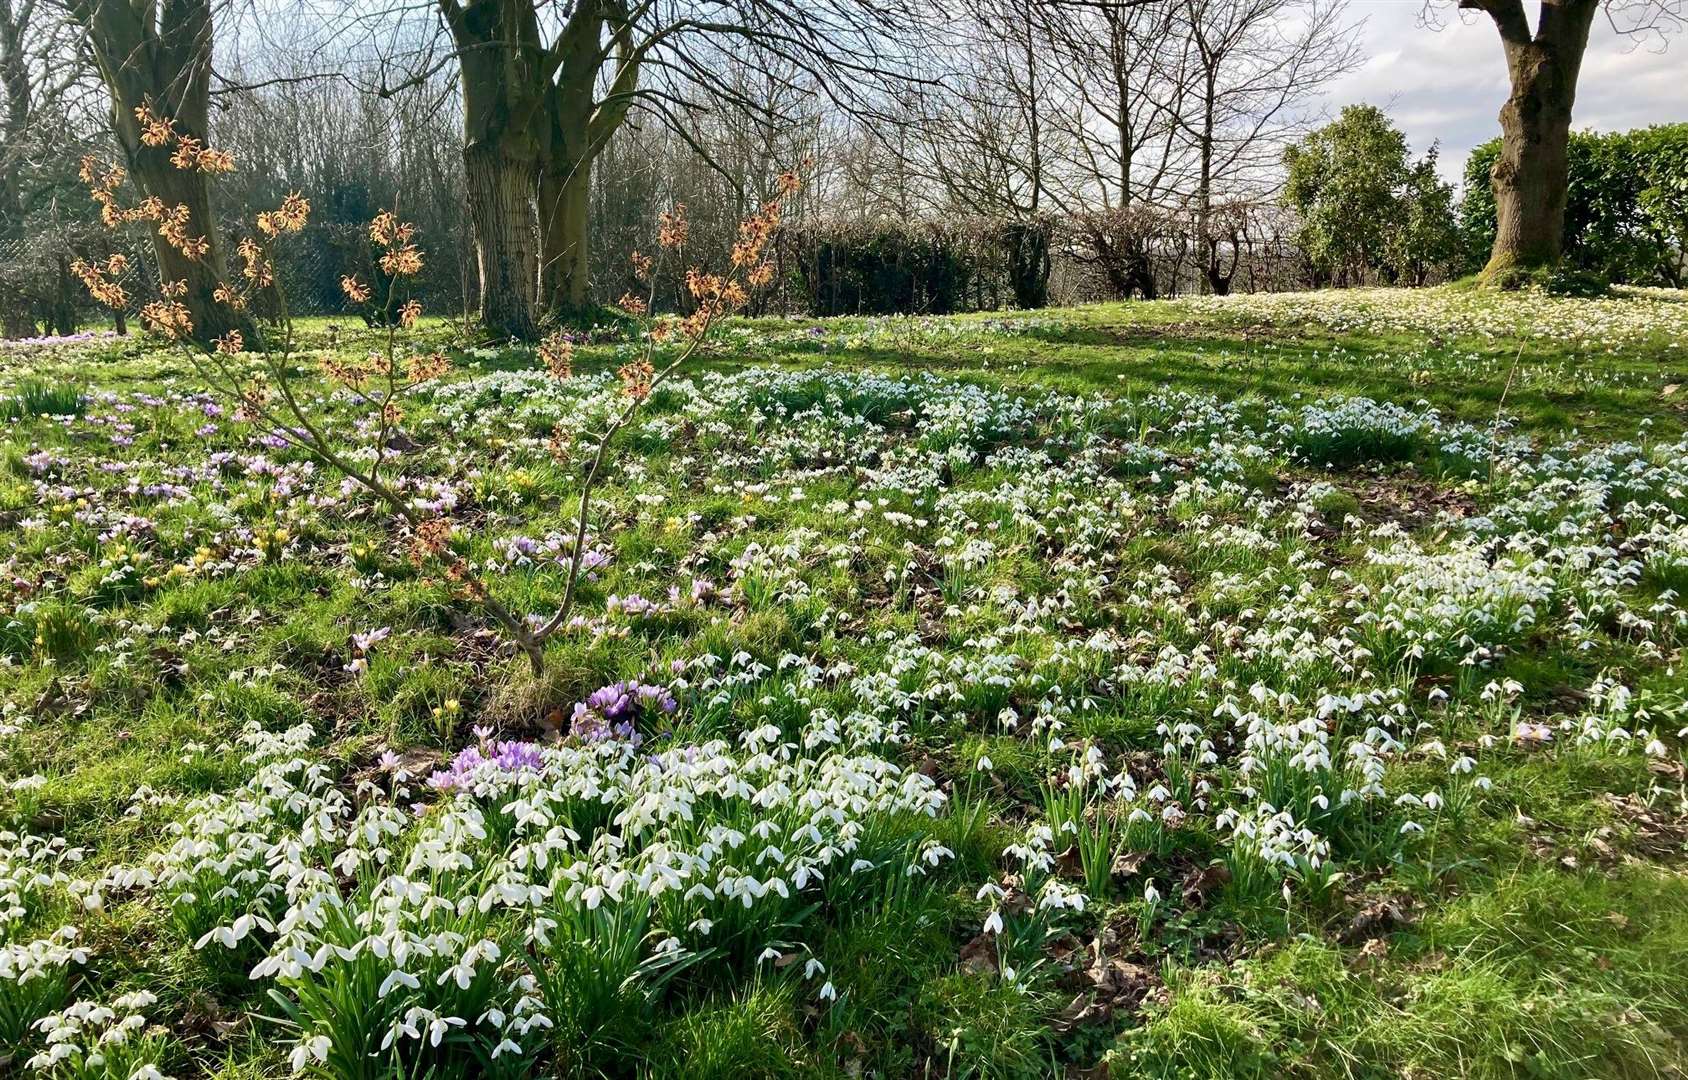 Fairseat Manor is a perfect place to see snowdrops in the colder months. Picture: National Garden Scheme